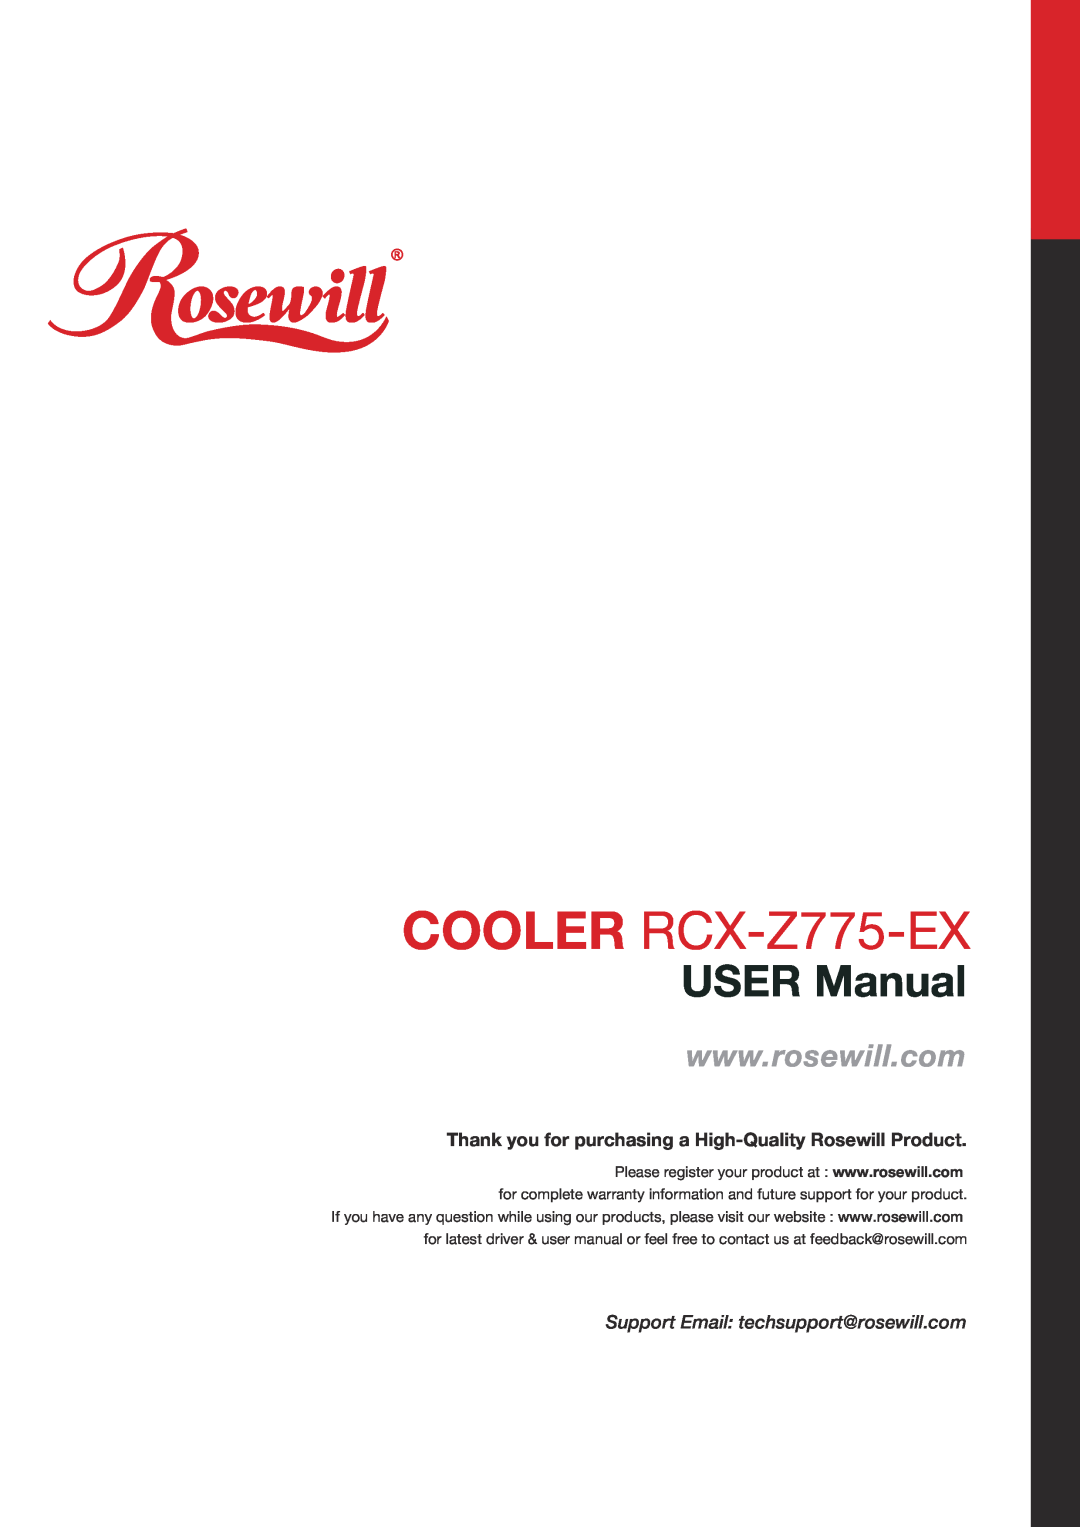 Rosewill RCX-Z755-EX user manual COOLER RCX-Z775-EX, Thank you for purchasing a High-Quality Rosewill Product 